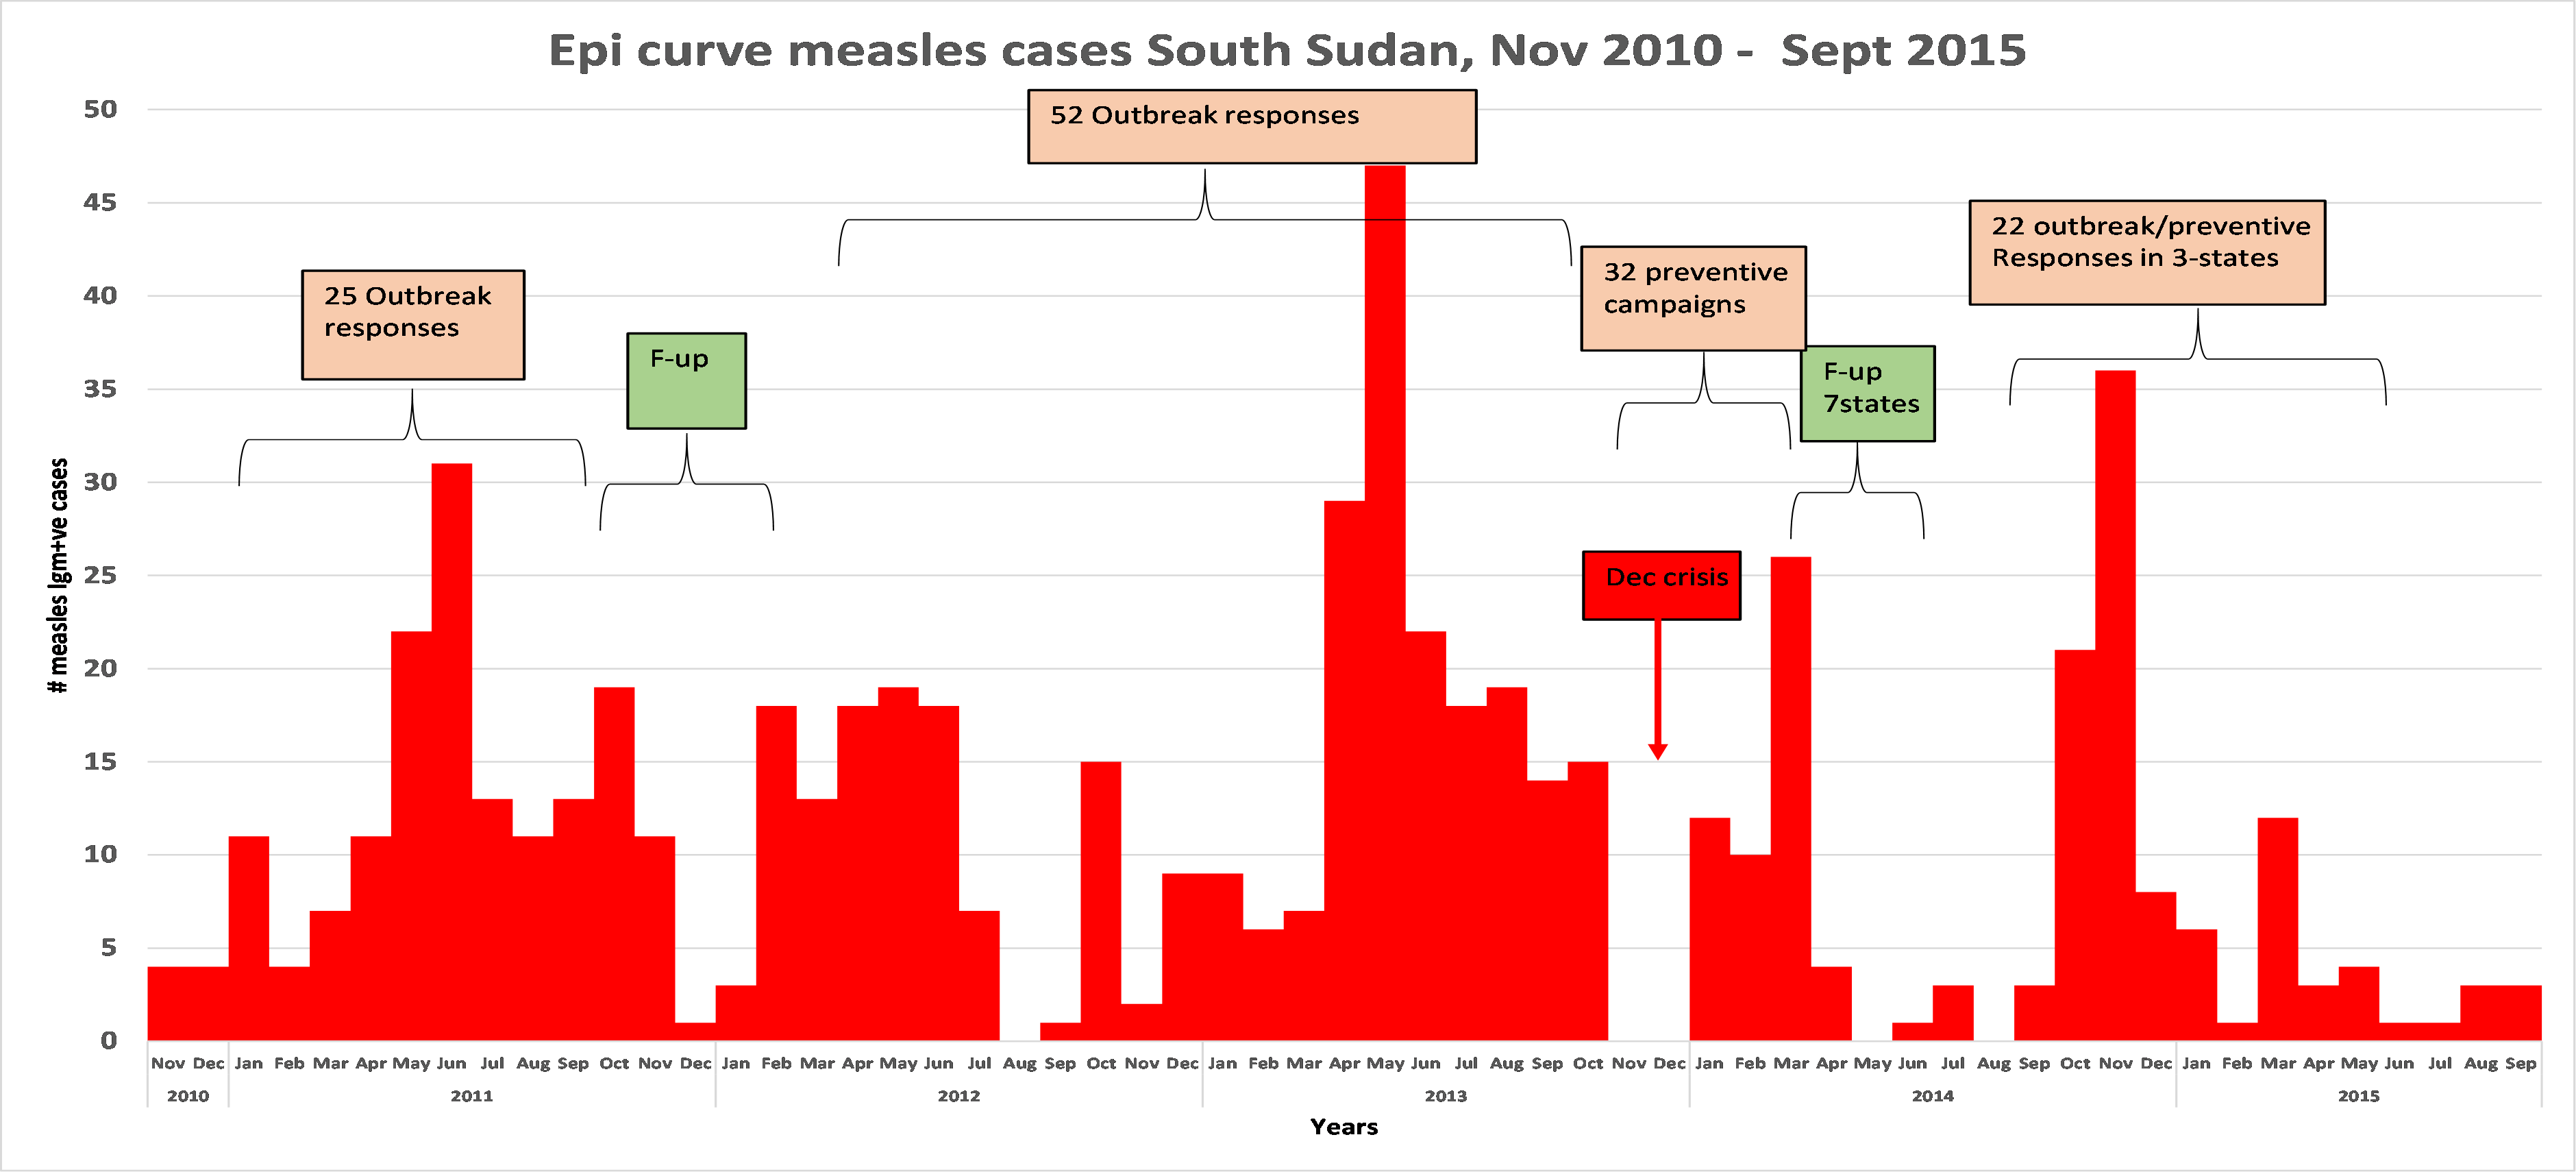 Targeted Measles Outbreak Response Vaccination in the Context of Measles Control and Elimination: Experiences from South Sudan